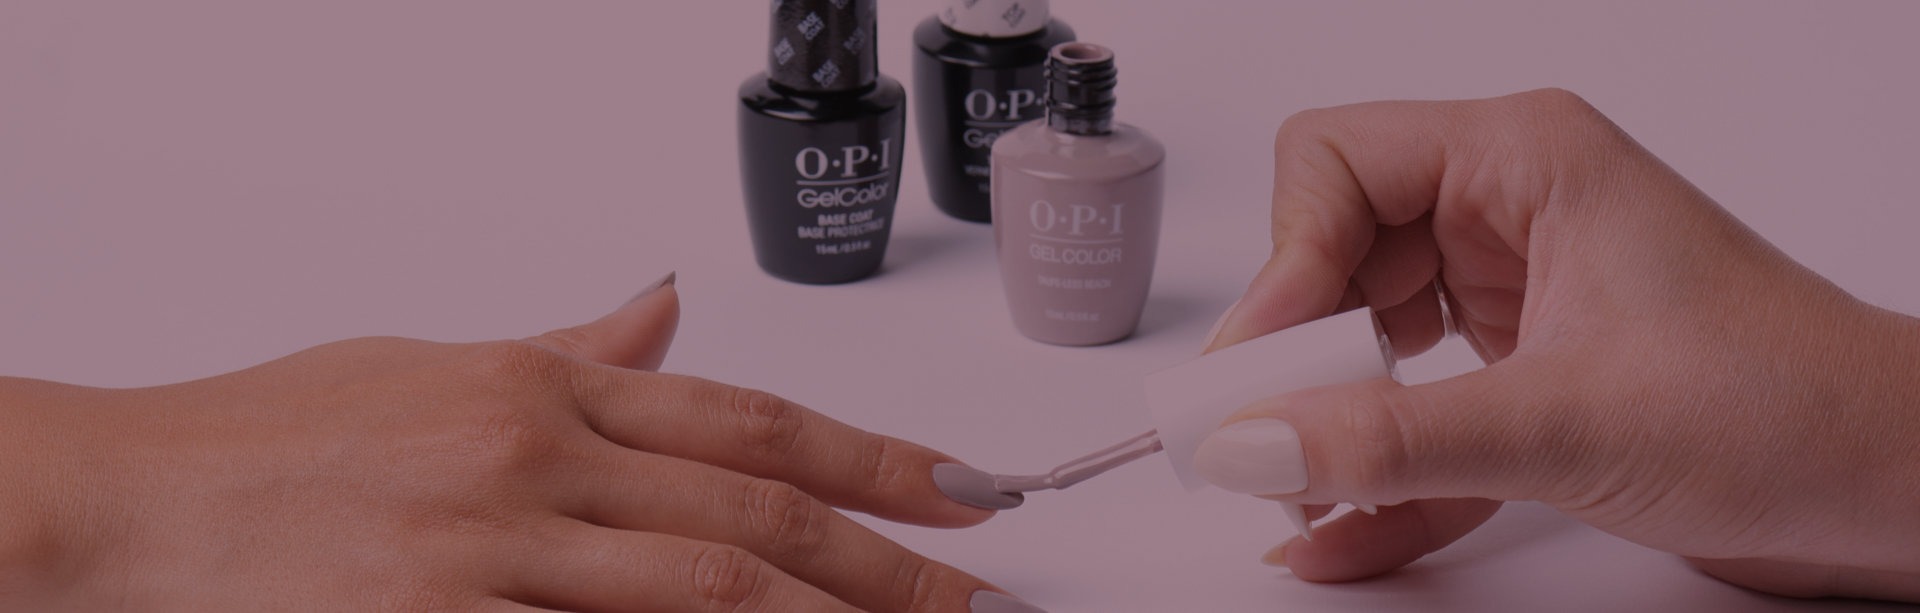 Shop Opi Products Opi